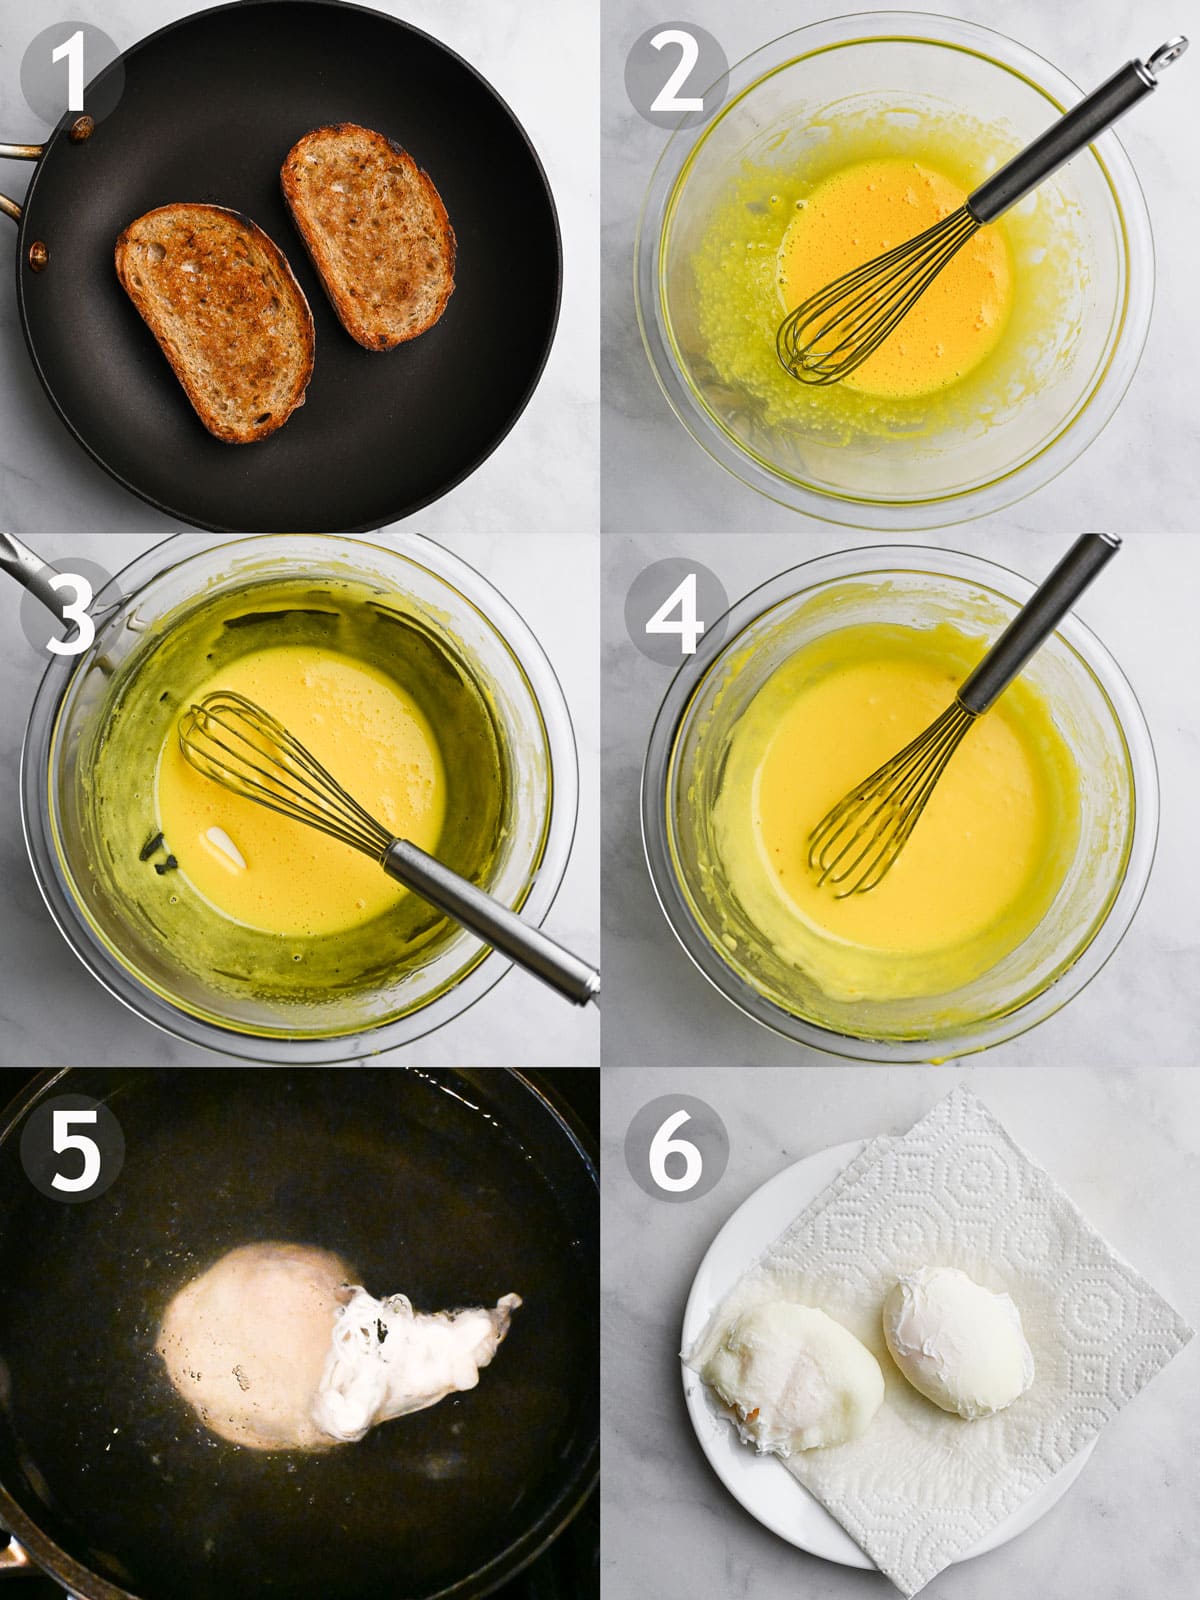 Recipe steps, including toasting the bread, making the hollandaise sauce and poaching eggs.